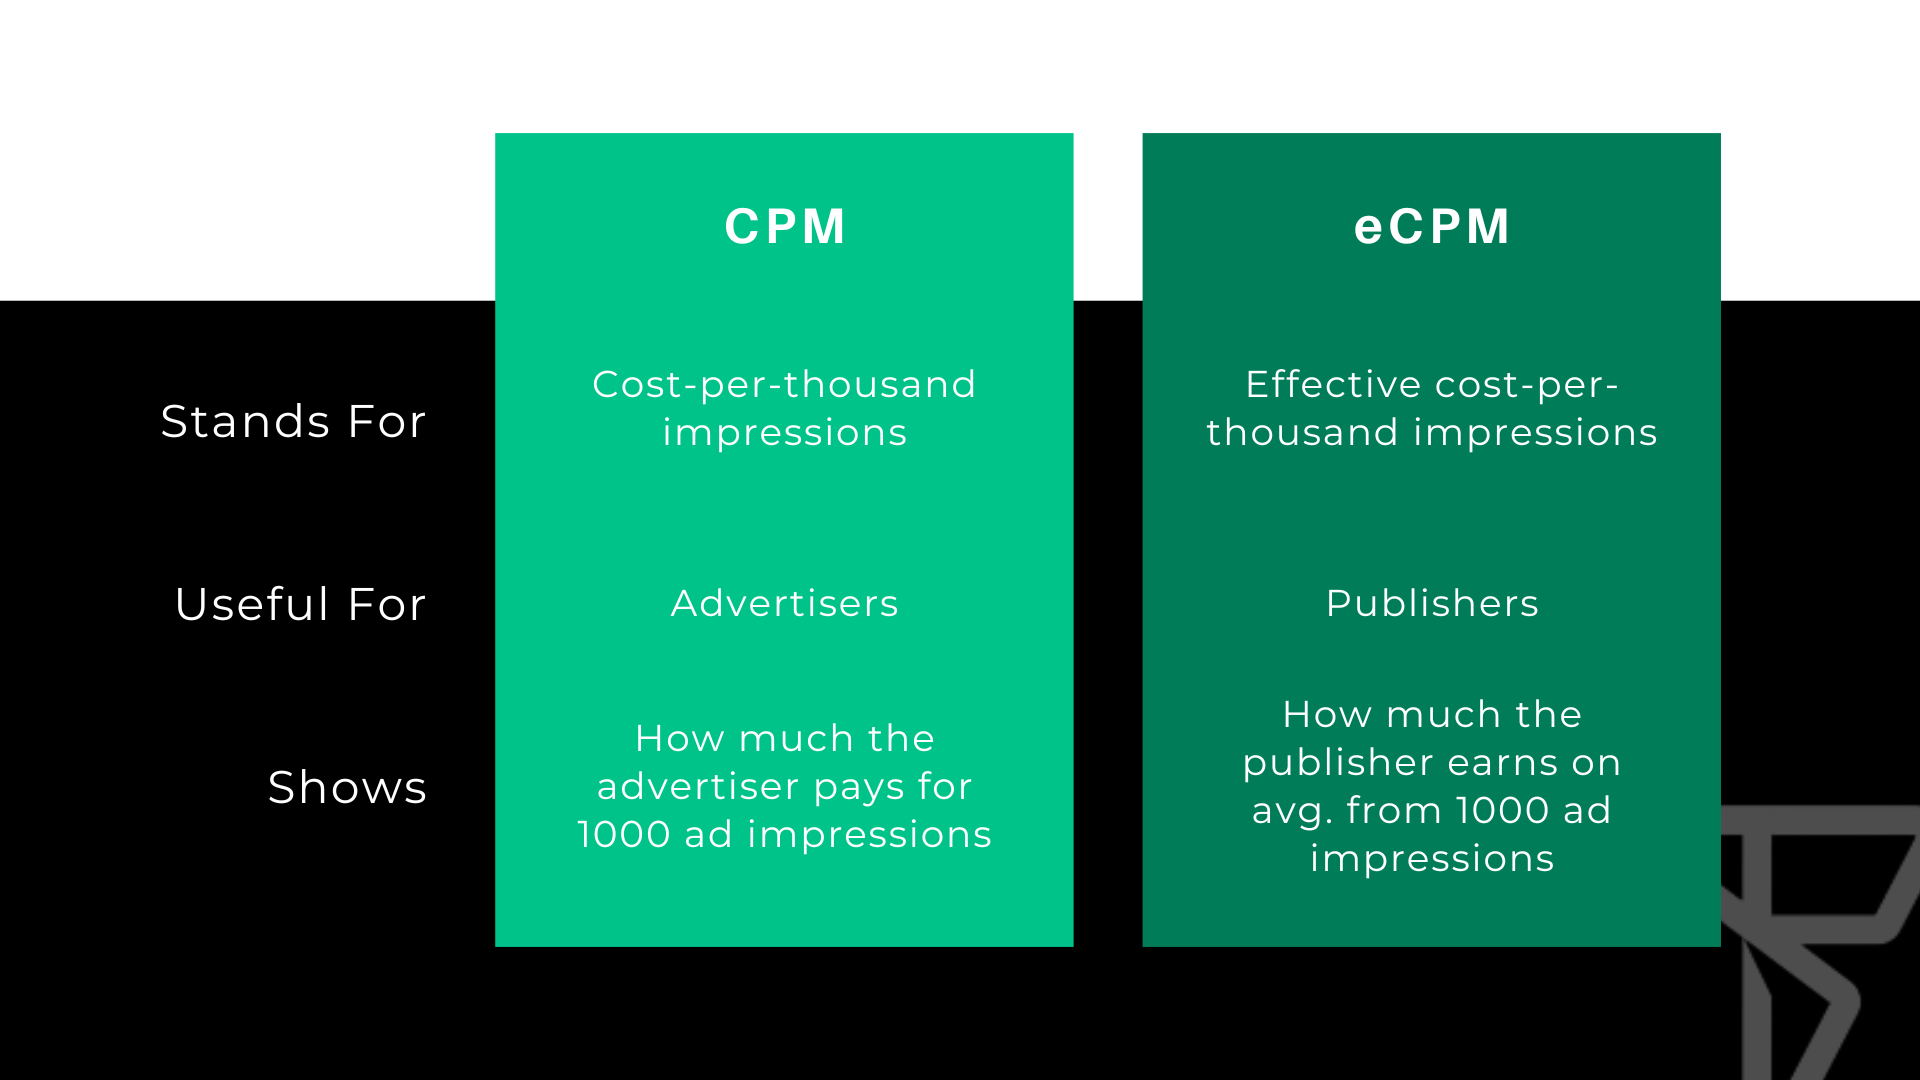 How to Calculate CPM and eCPM